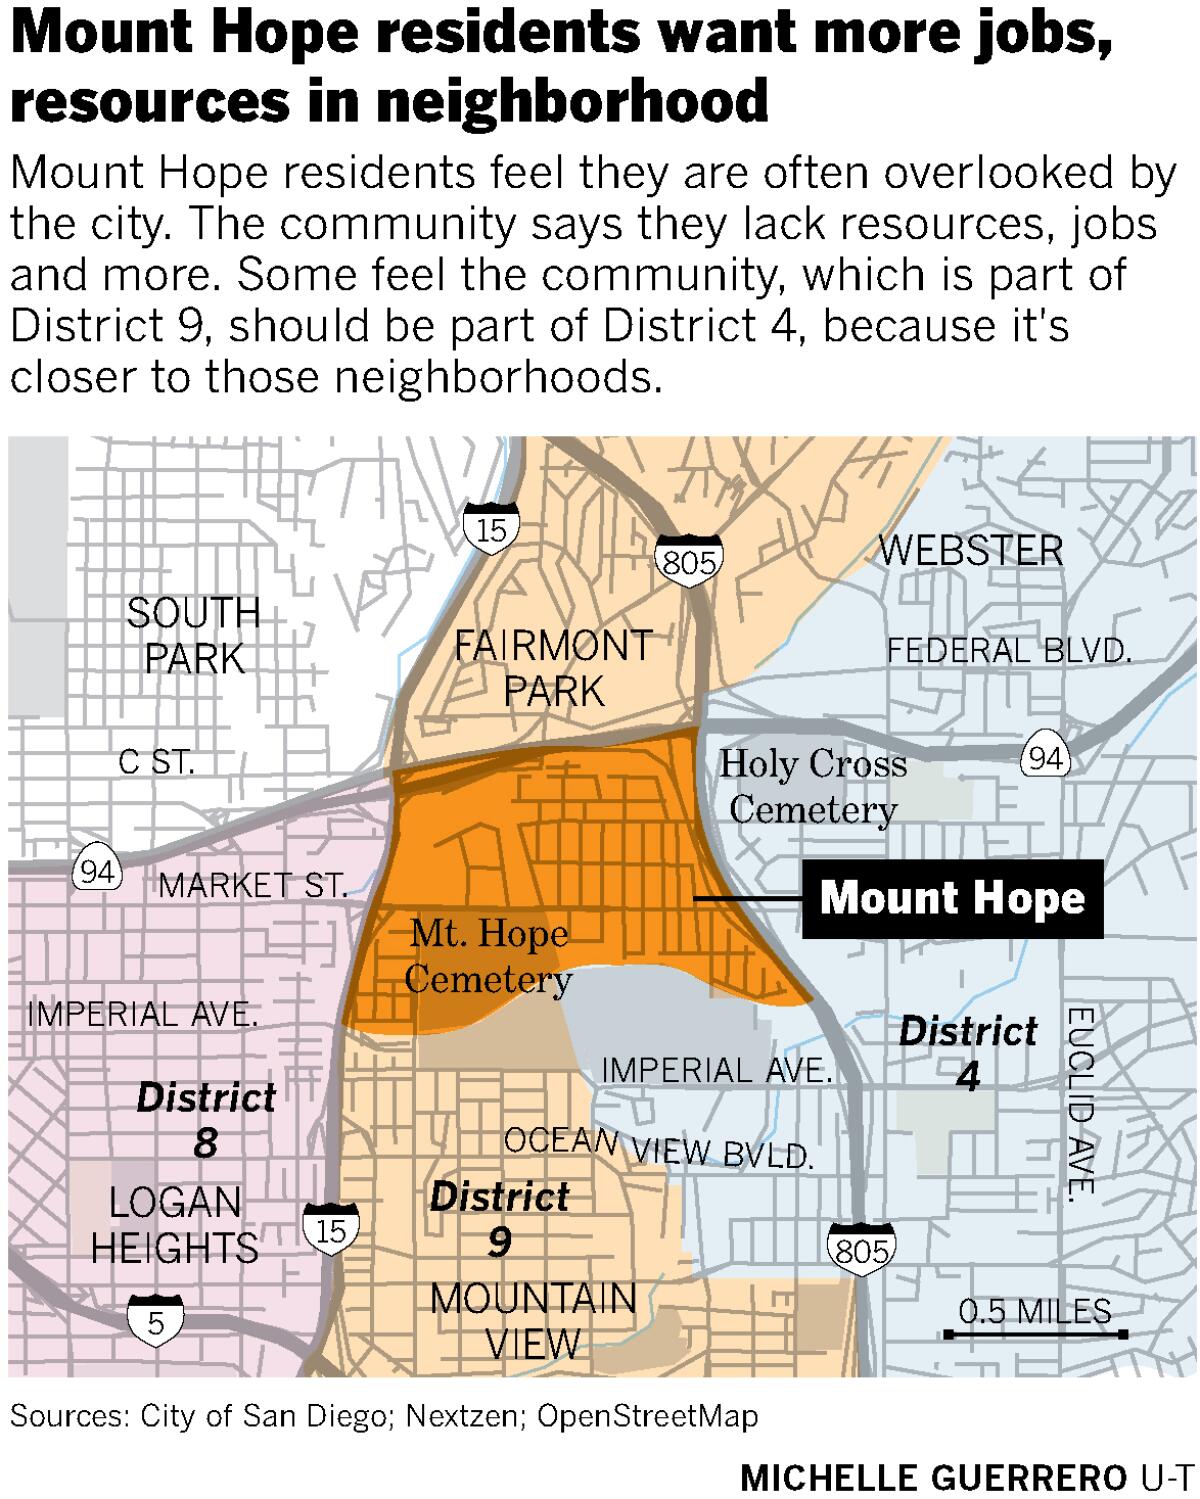 Mount Hope residents want more jobs, resources in neighborhood